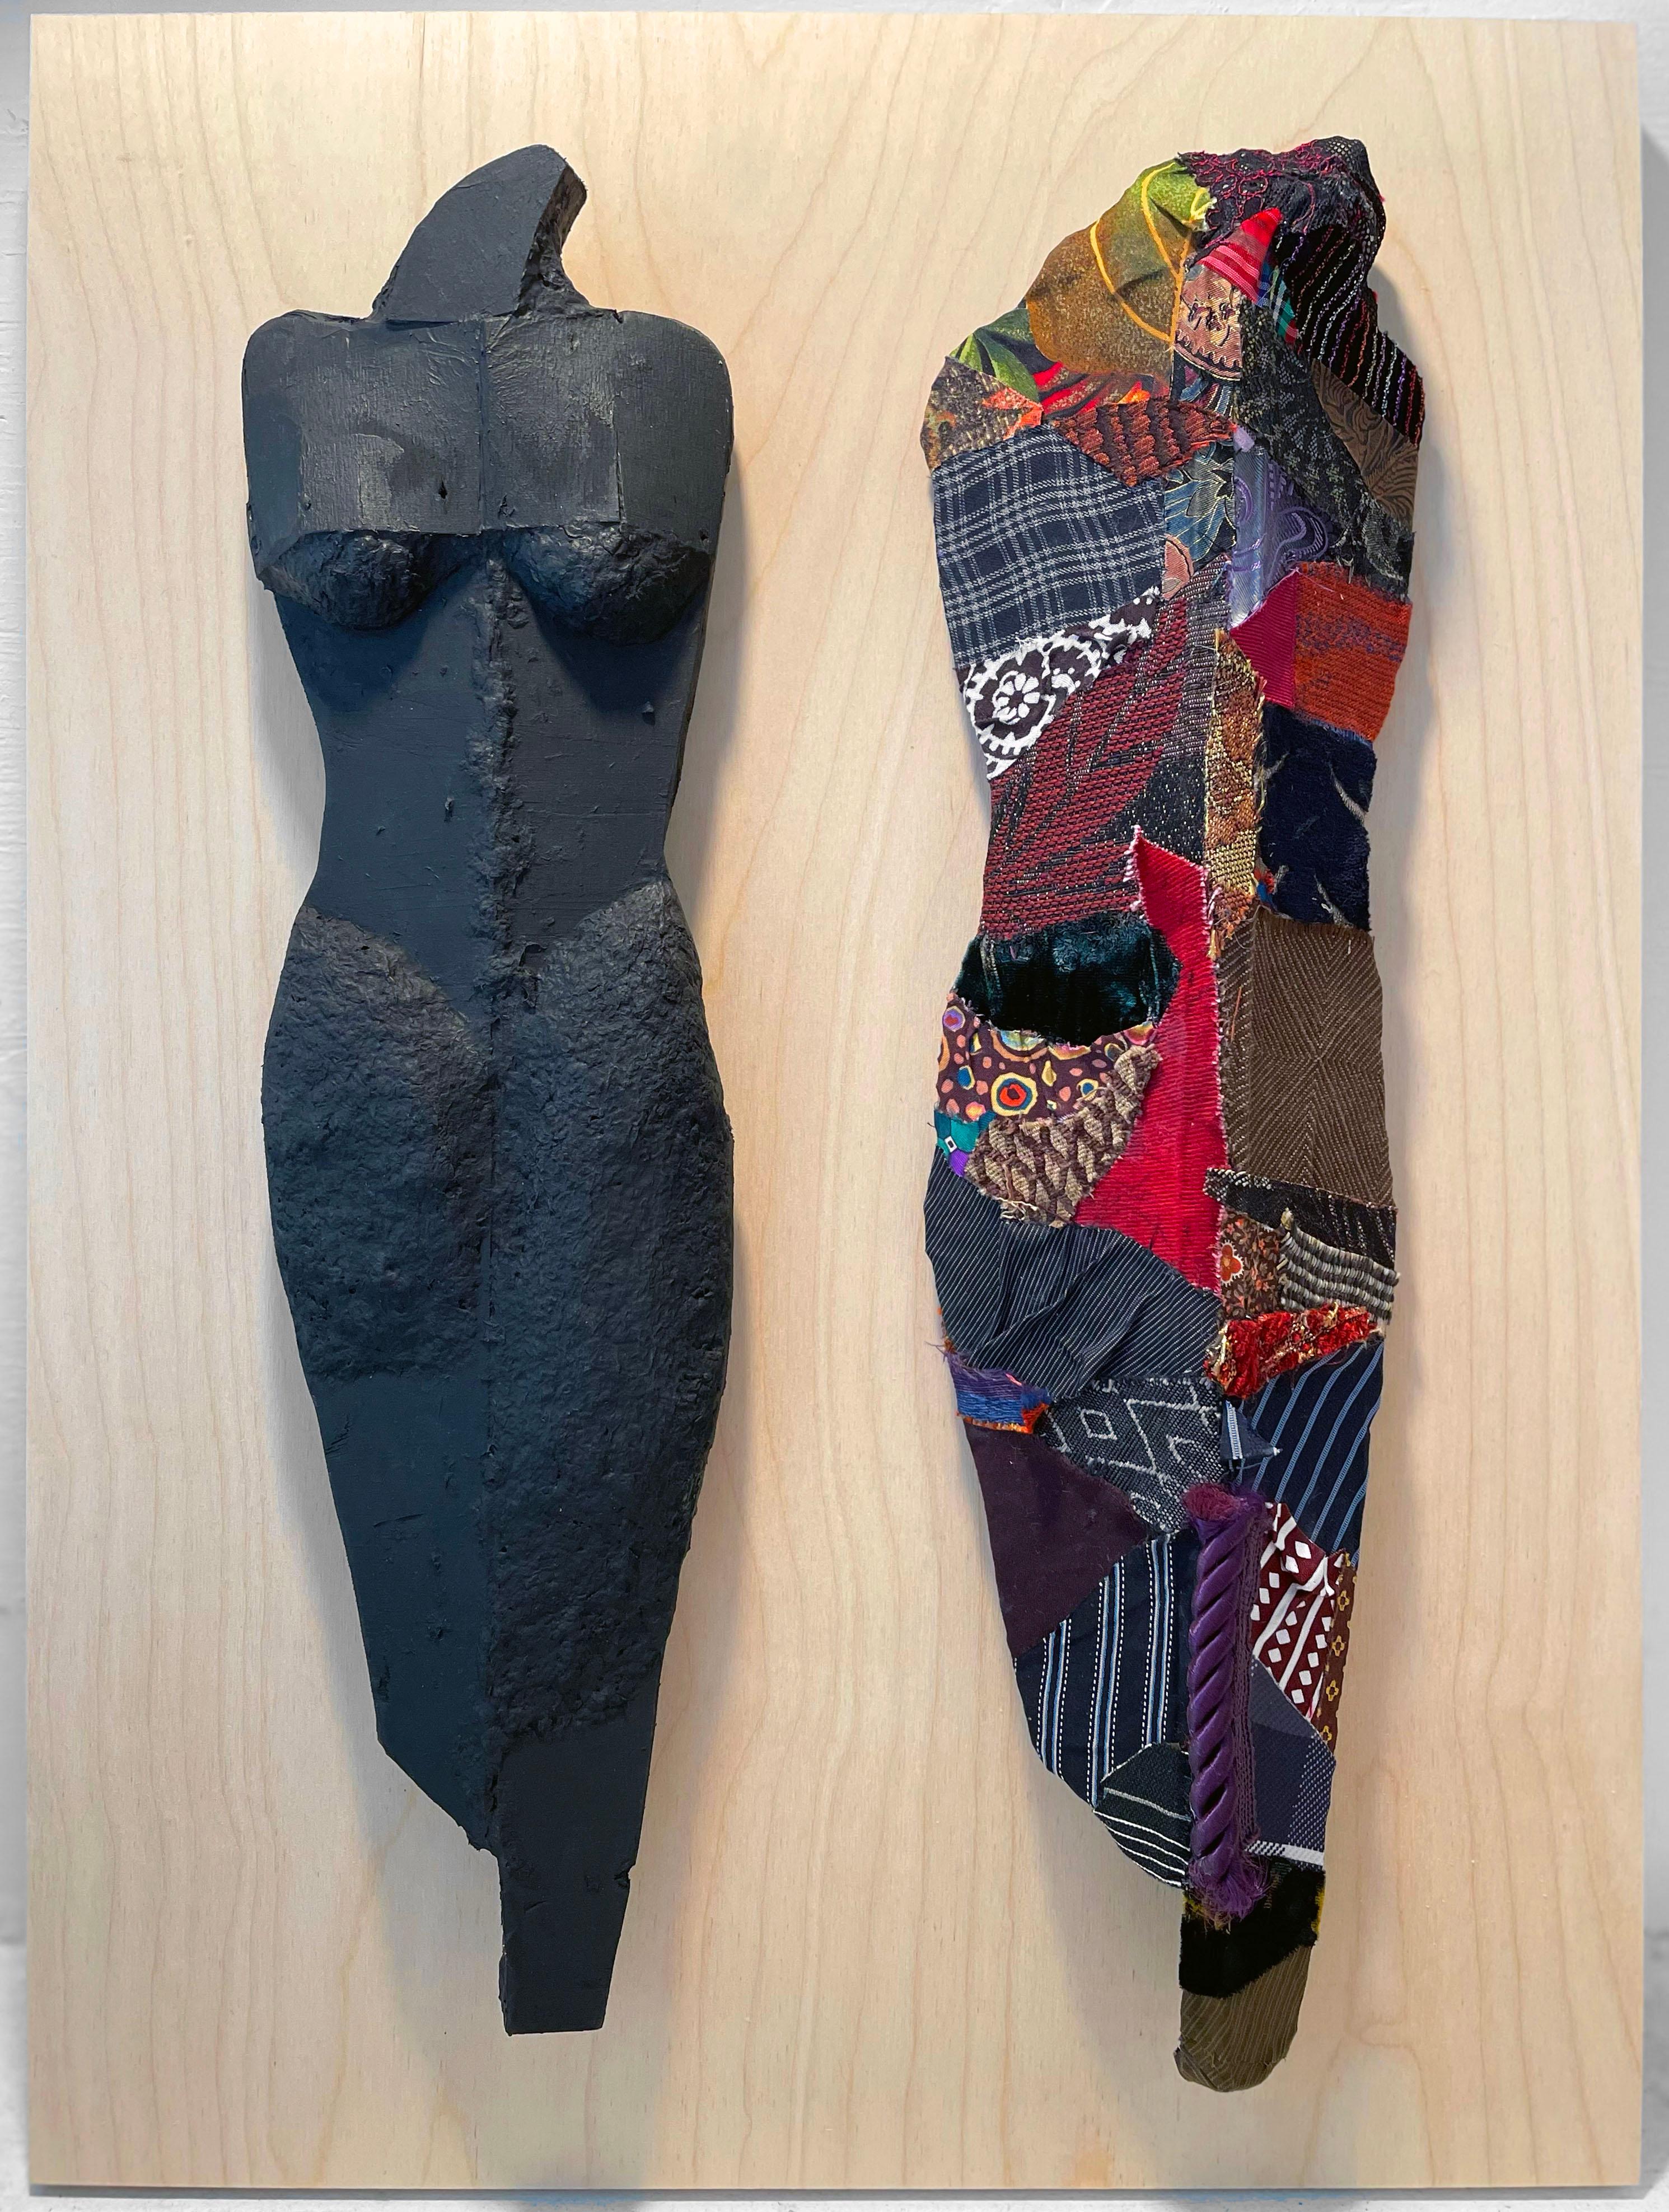 Linda Stein, 1218 - Contemporary Art 3D Mixed Media Fabric Sculptural Collage

Linda Stein started her Knights of Protection series after she was forced to evacuate her New York downtown studio for a year post-9/11.  Stein's Knights are shield-like